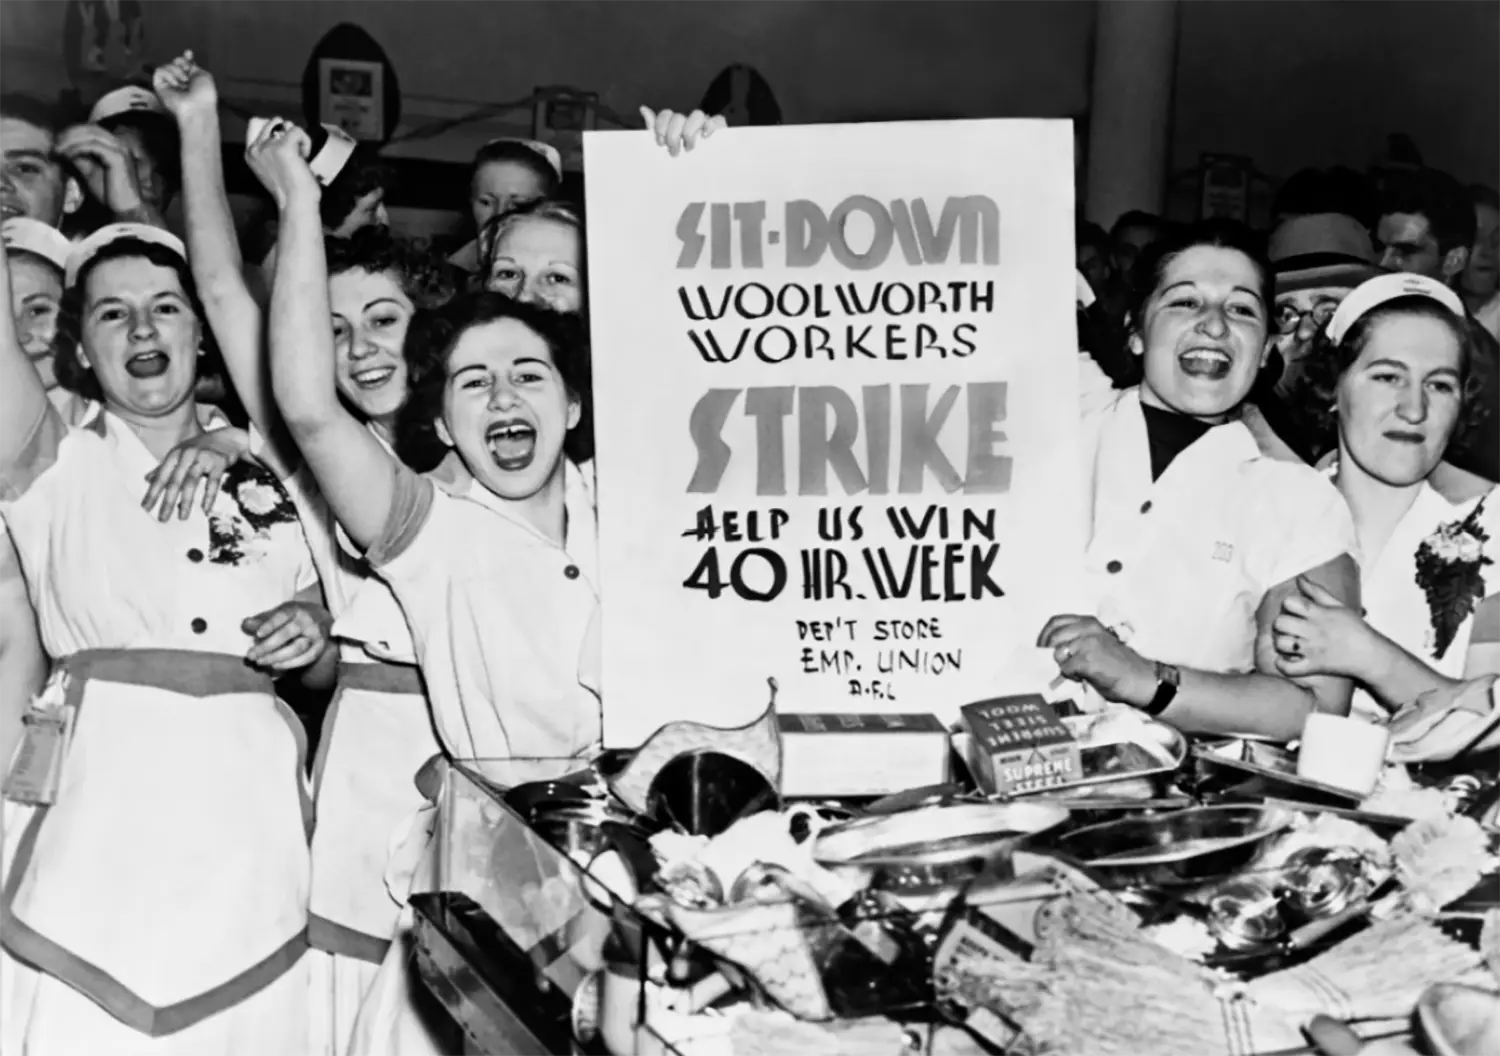 Women dressed in their Woolworth’s uniforms smile and cheer, holding the sign “Sit-down // Woolworth Workers Strike // Help us win 40 hr. week // Dep’t store emp. union.”